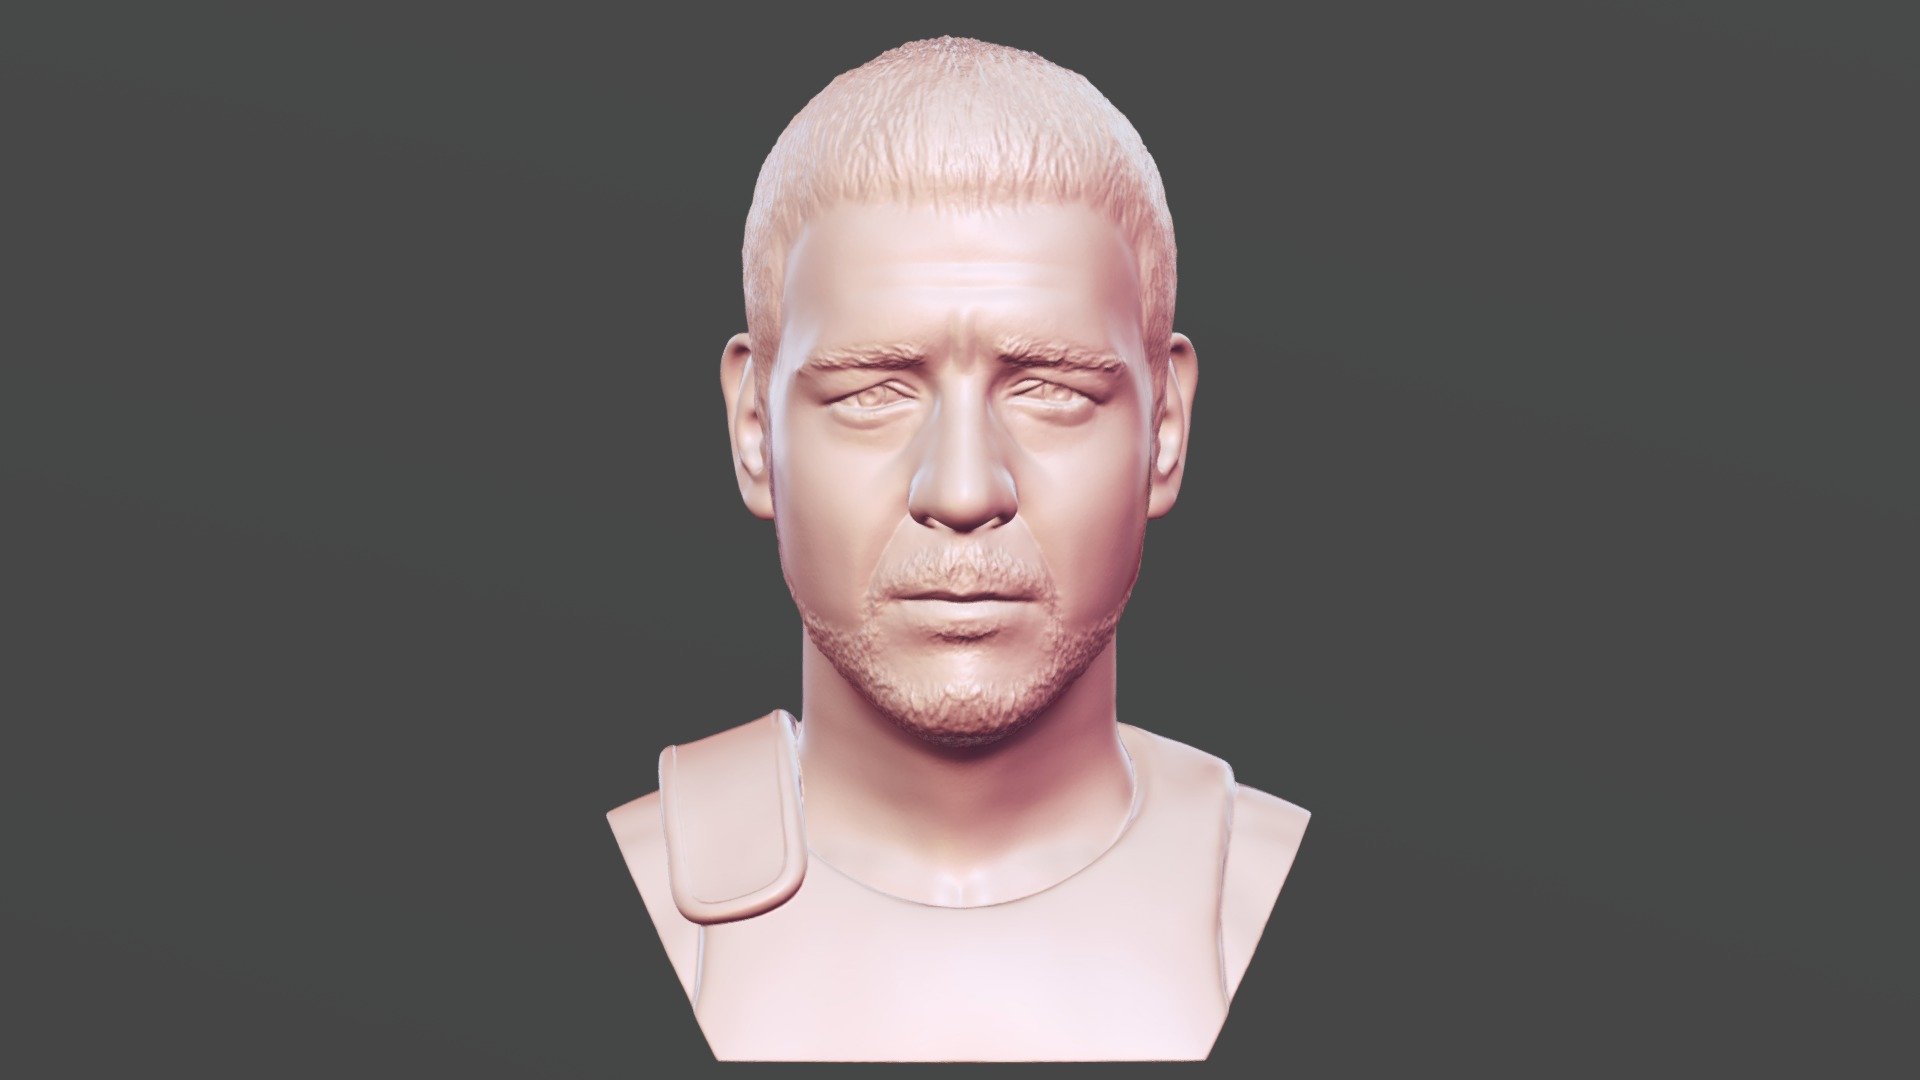 Gladiator Russell Crowe bust for 3D printing